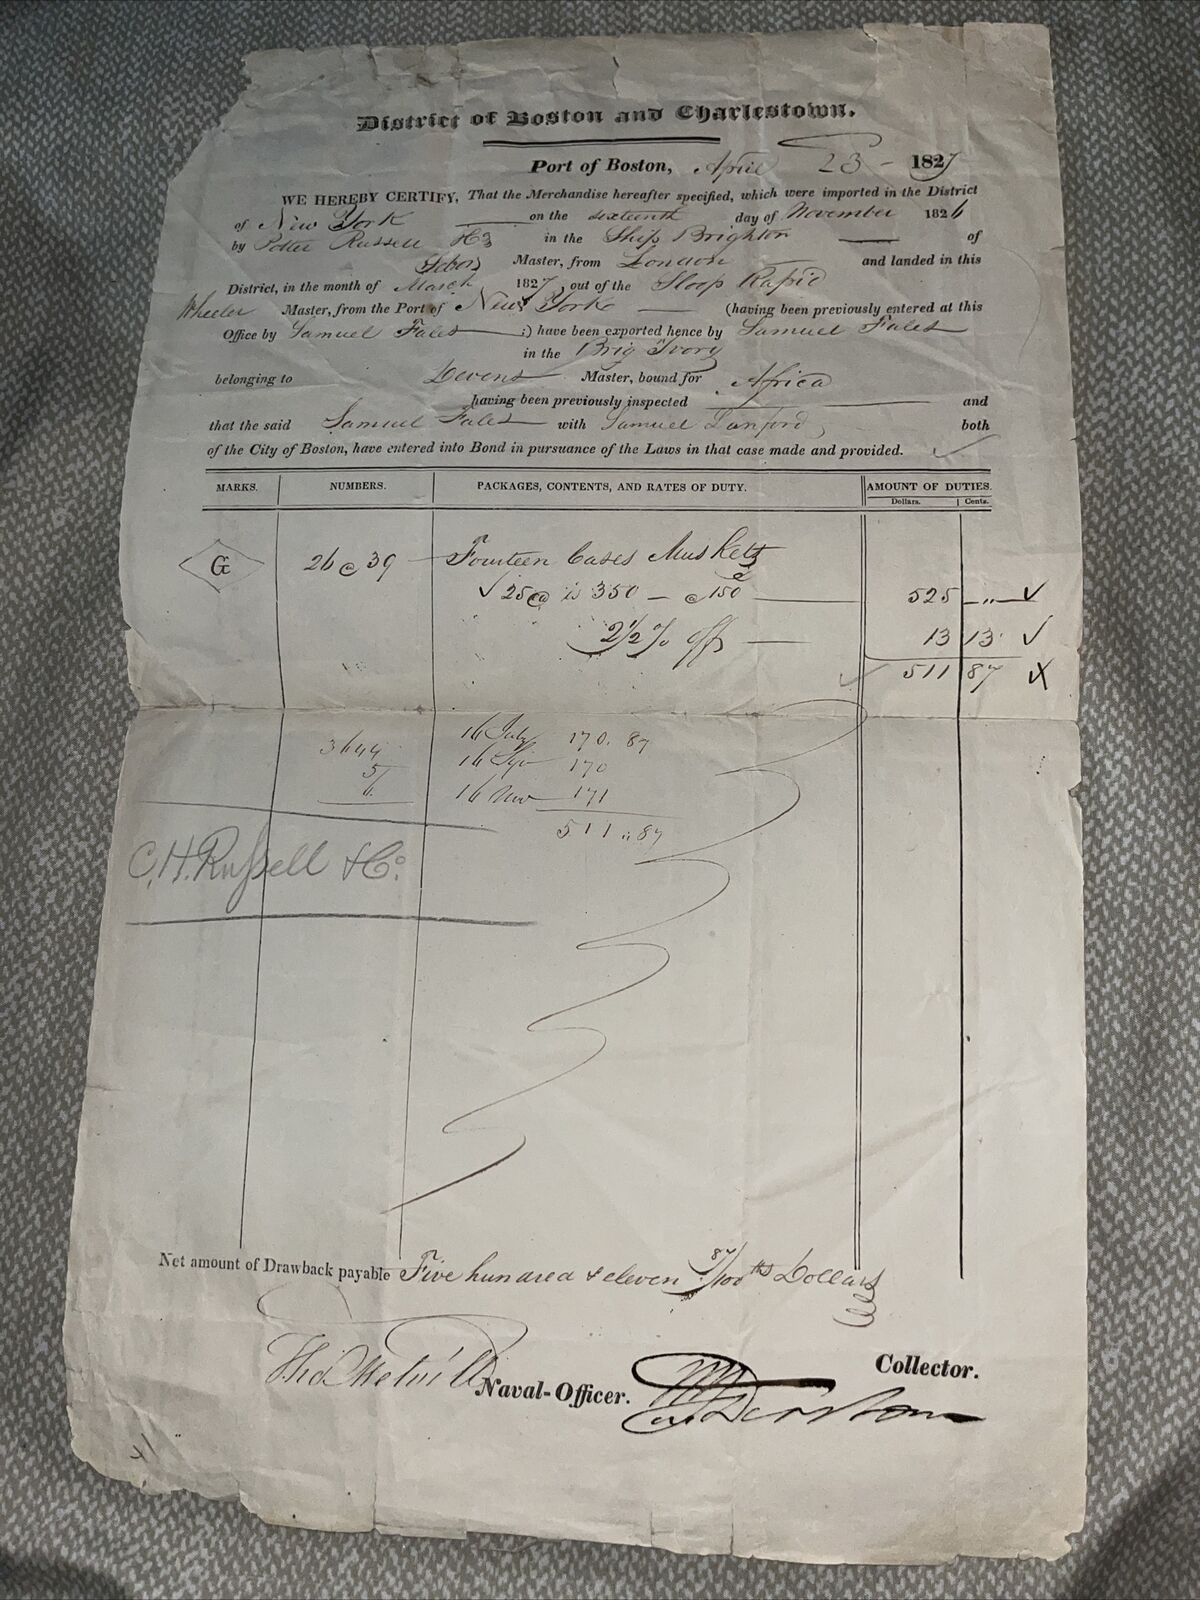 1827 Port Of Boston Import Certification: 14 Cases of Muskets - Charles Russell